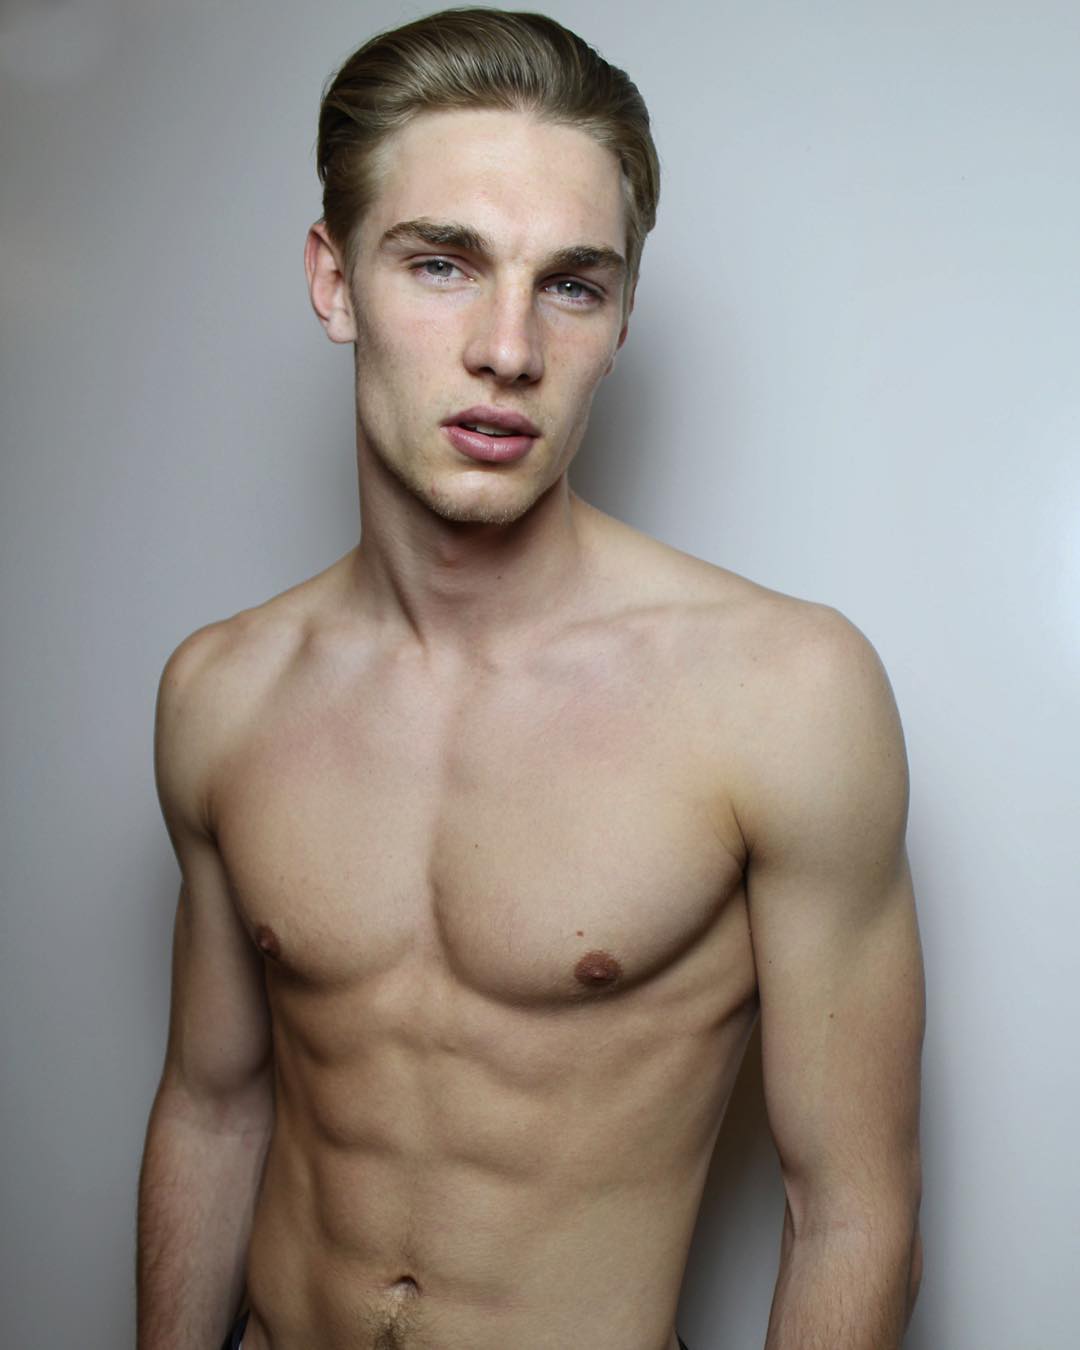 UK Model Tommy Marr - New Shirtless & Barefoot Twitter Pics.